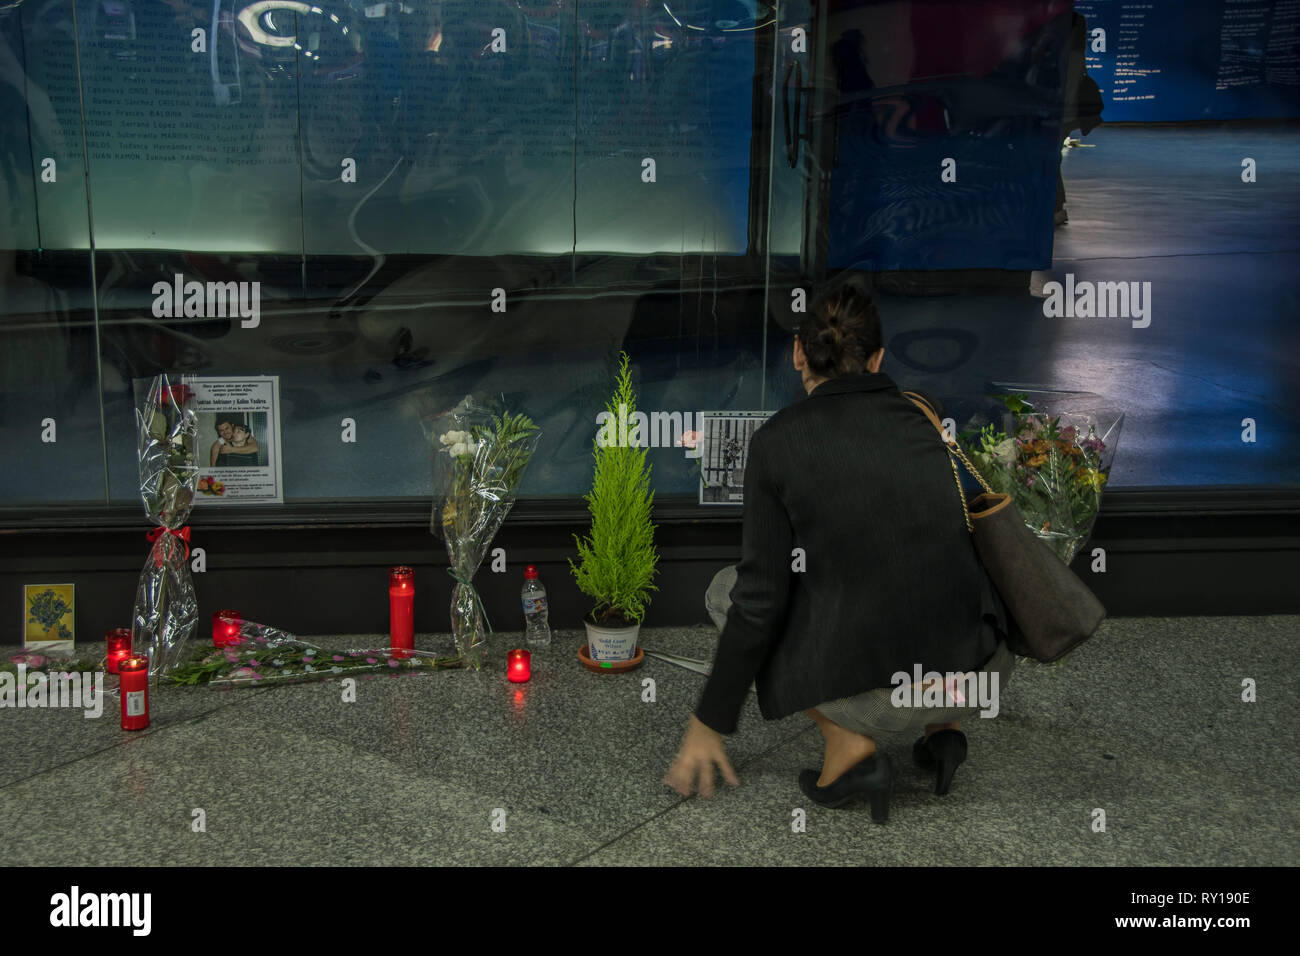 Madrid, Spain. 11th Mar, 2019. Wreath flower crown  in the mausoleum place as a tribute of those affected by the terrorist attack in 2004. Homage to the victims of 11 terrorism atack 2004 the atocha train station in Madrid, Spain Credit: Alberto Sibaja Ramírez/Alamy Live News Stock Photo